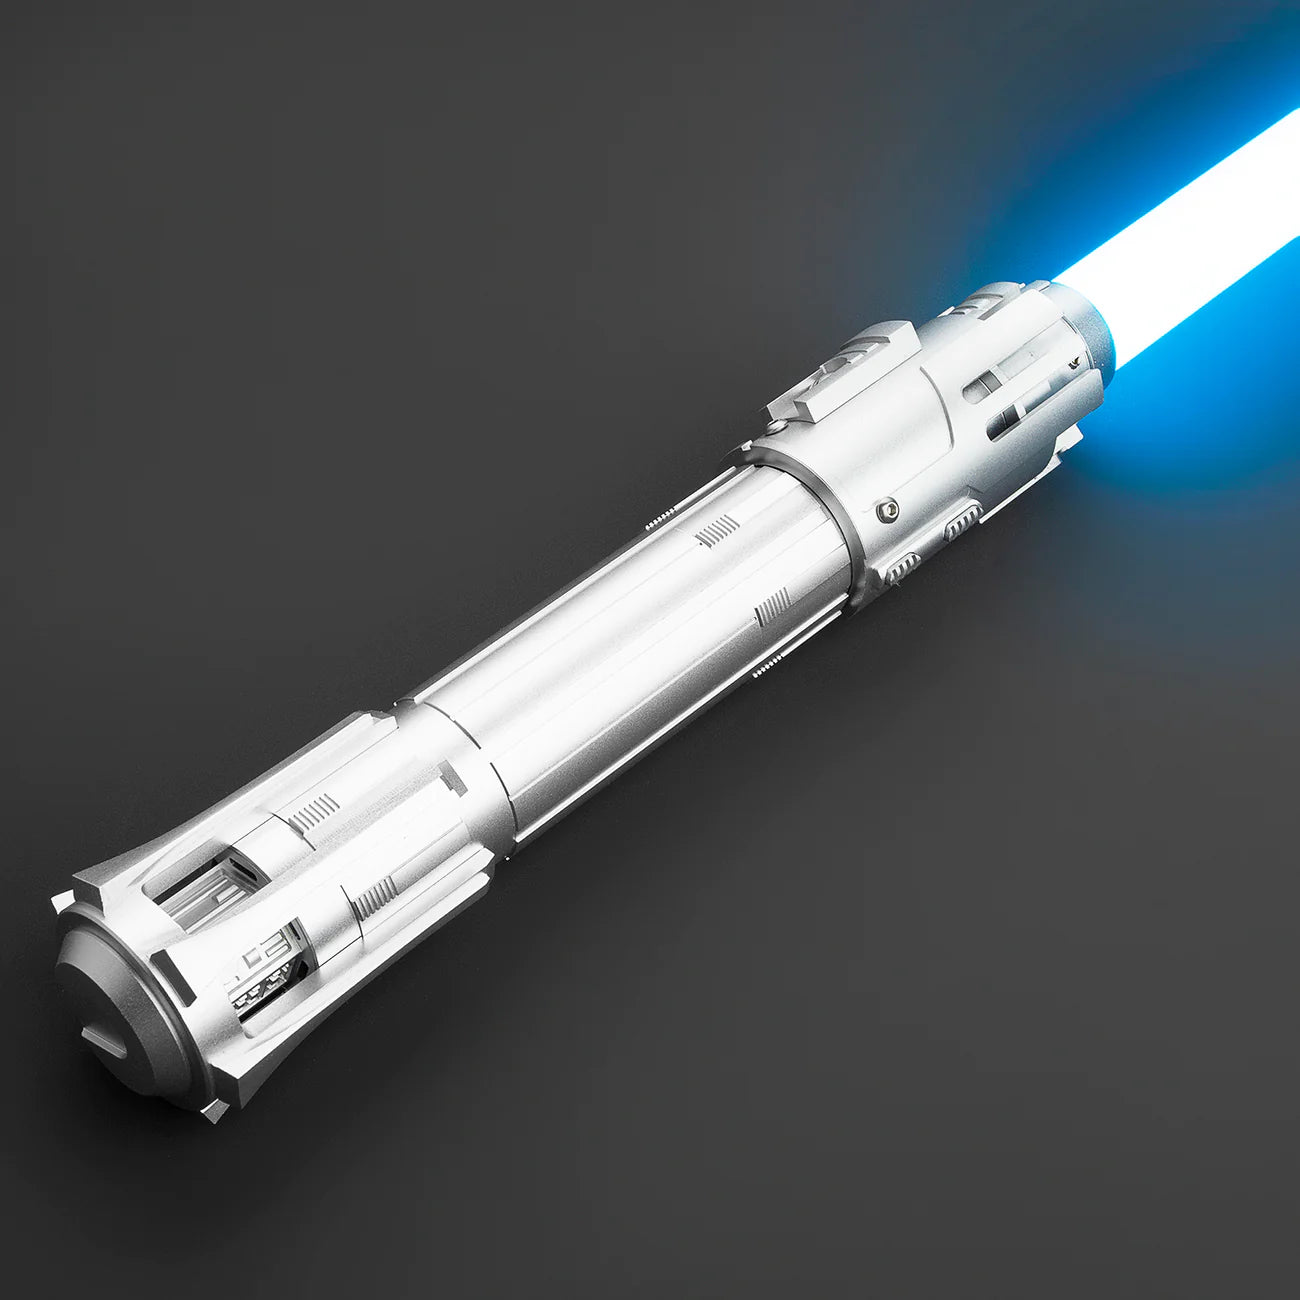 THE SILENT SOLO LIGHTSABER